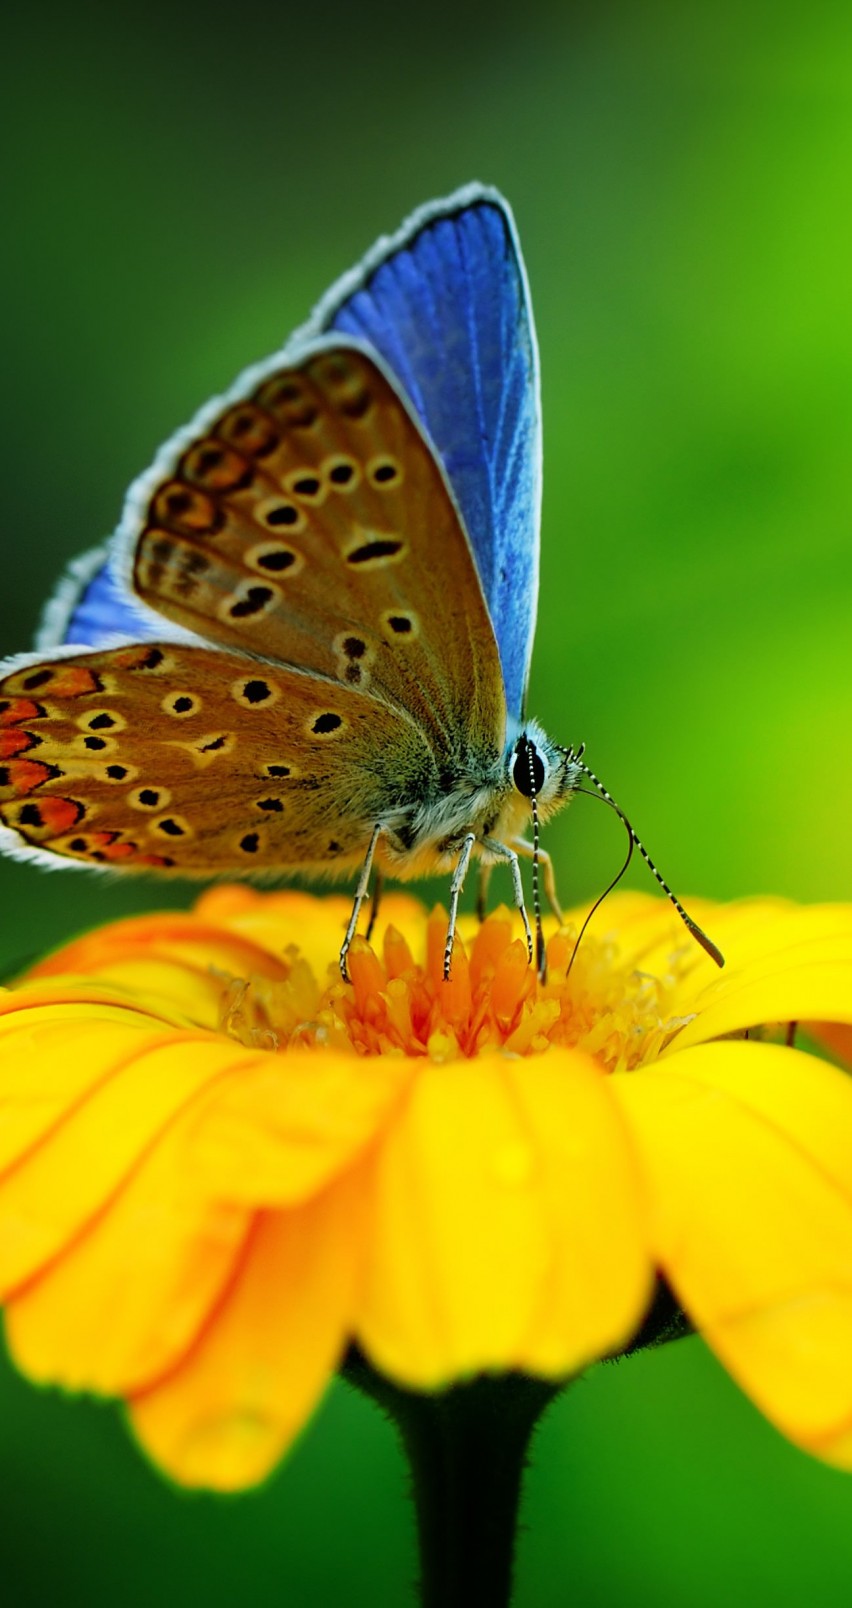 Butterfly Collecting Pollen Wallpaper for Apple iPhone 6 / 6s